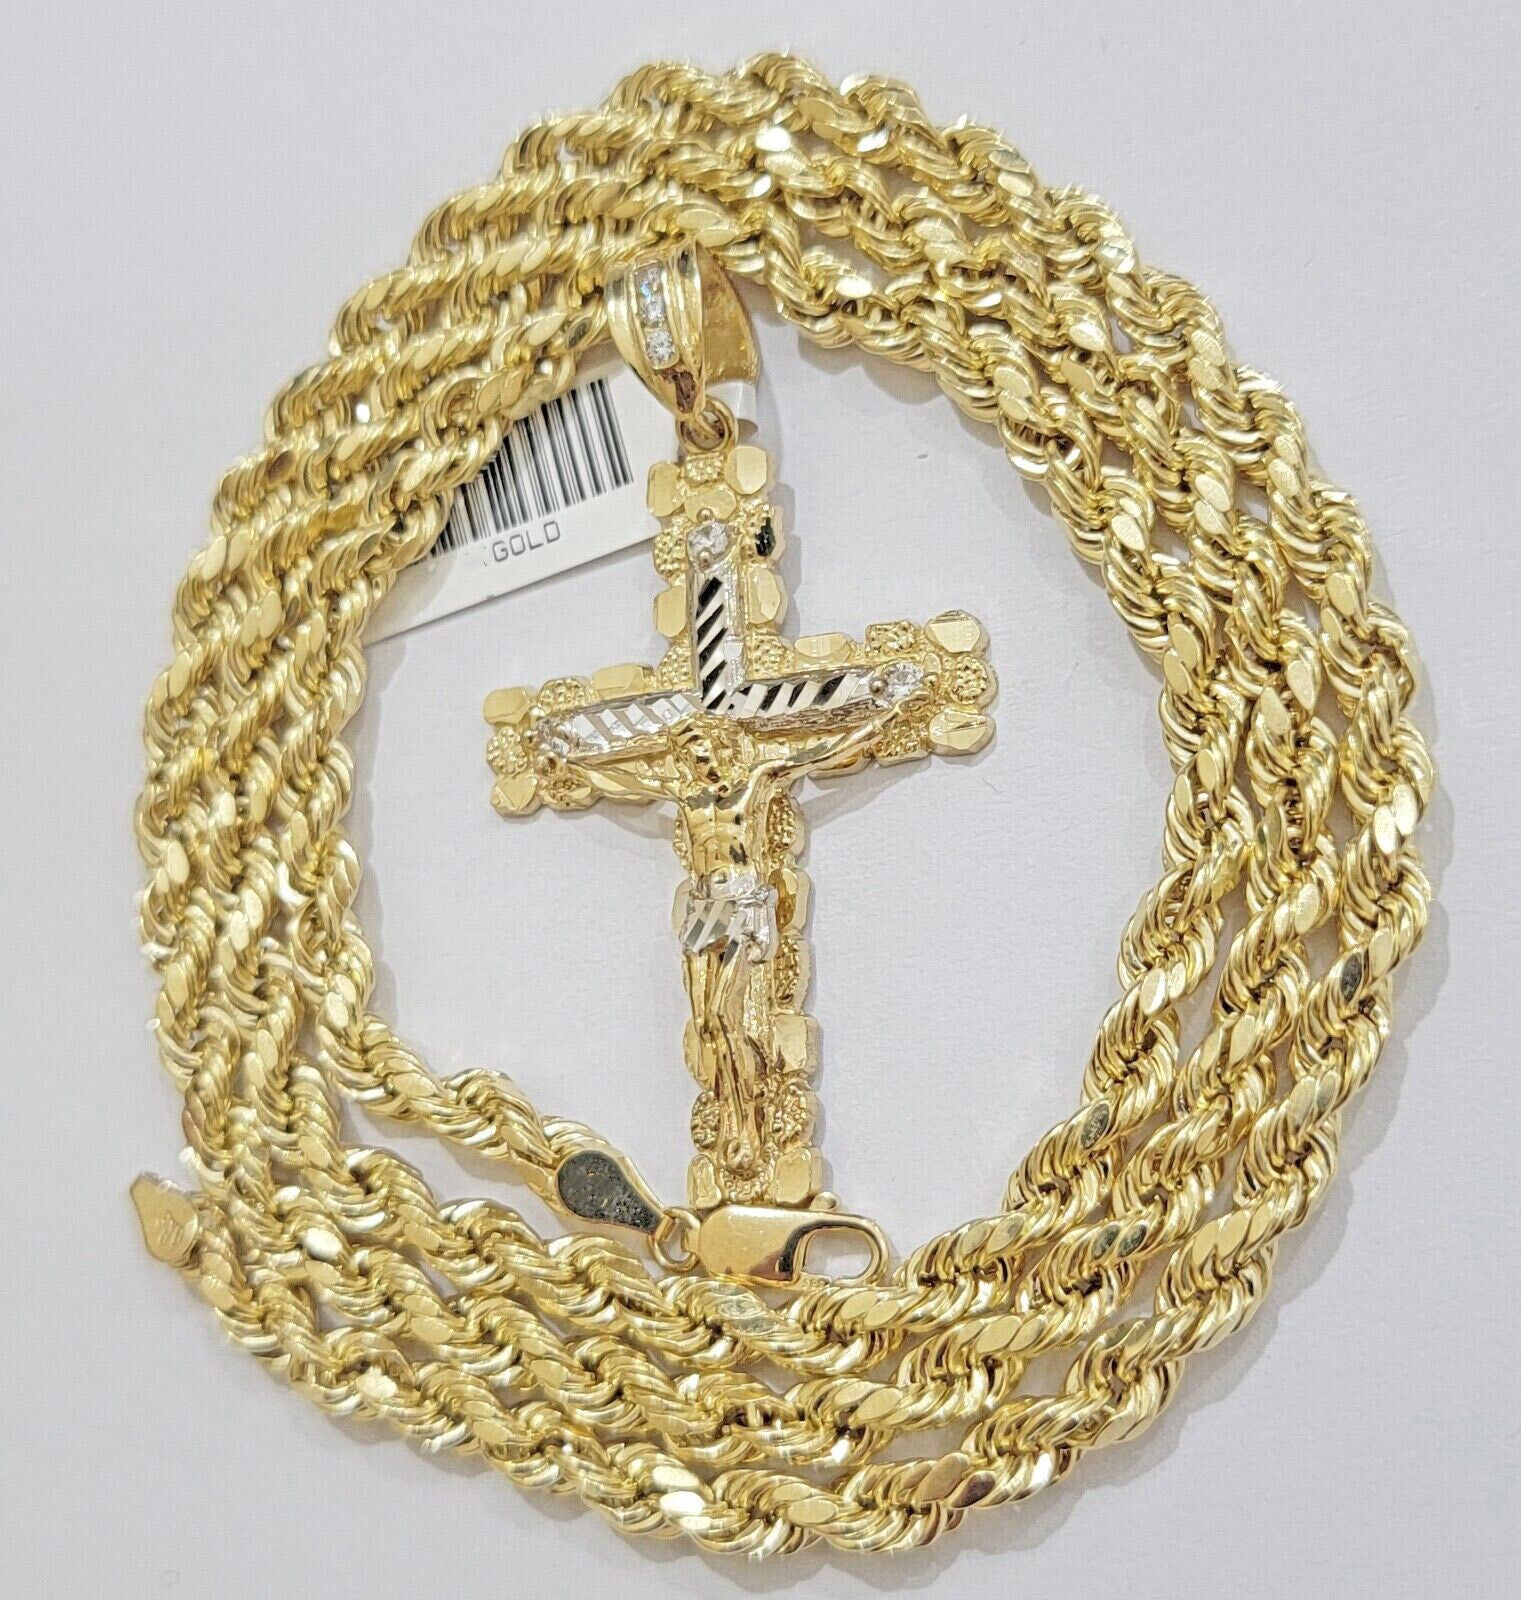 Real 10k Gold Rope Chain 20 inch Jesus Cross Charm Pendant Set 5mm Necklace Mens